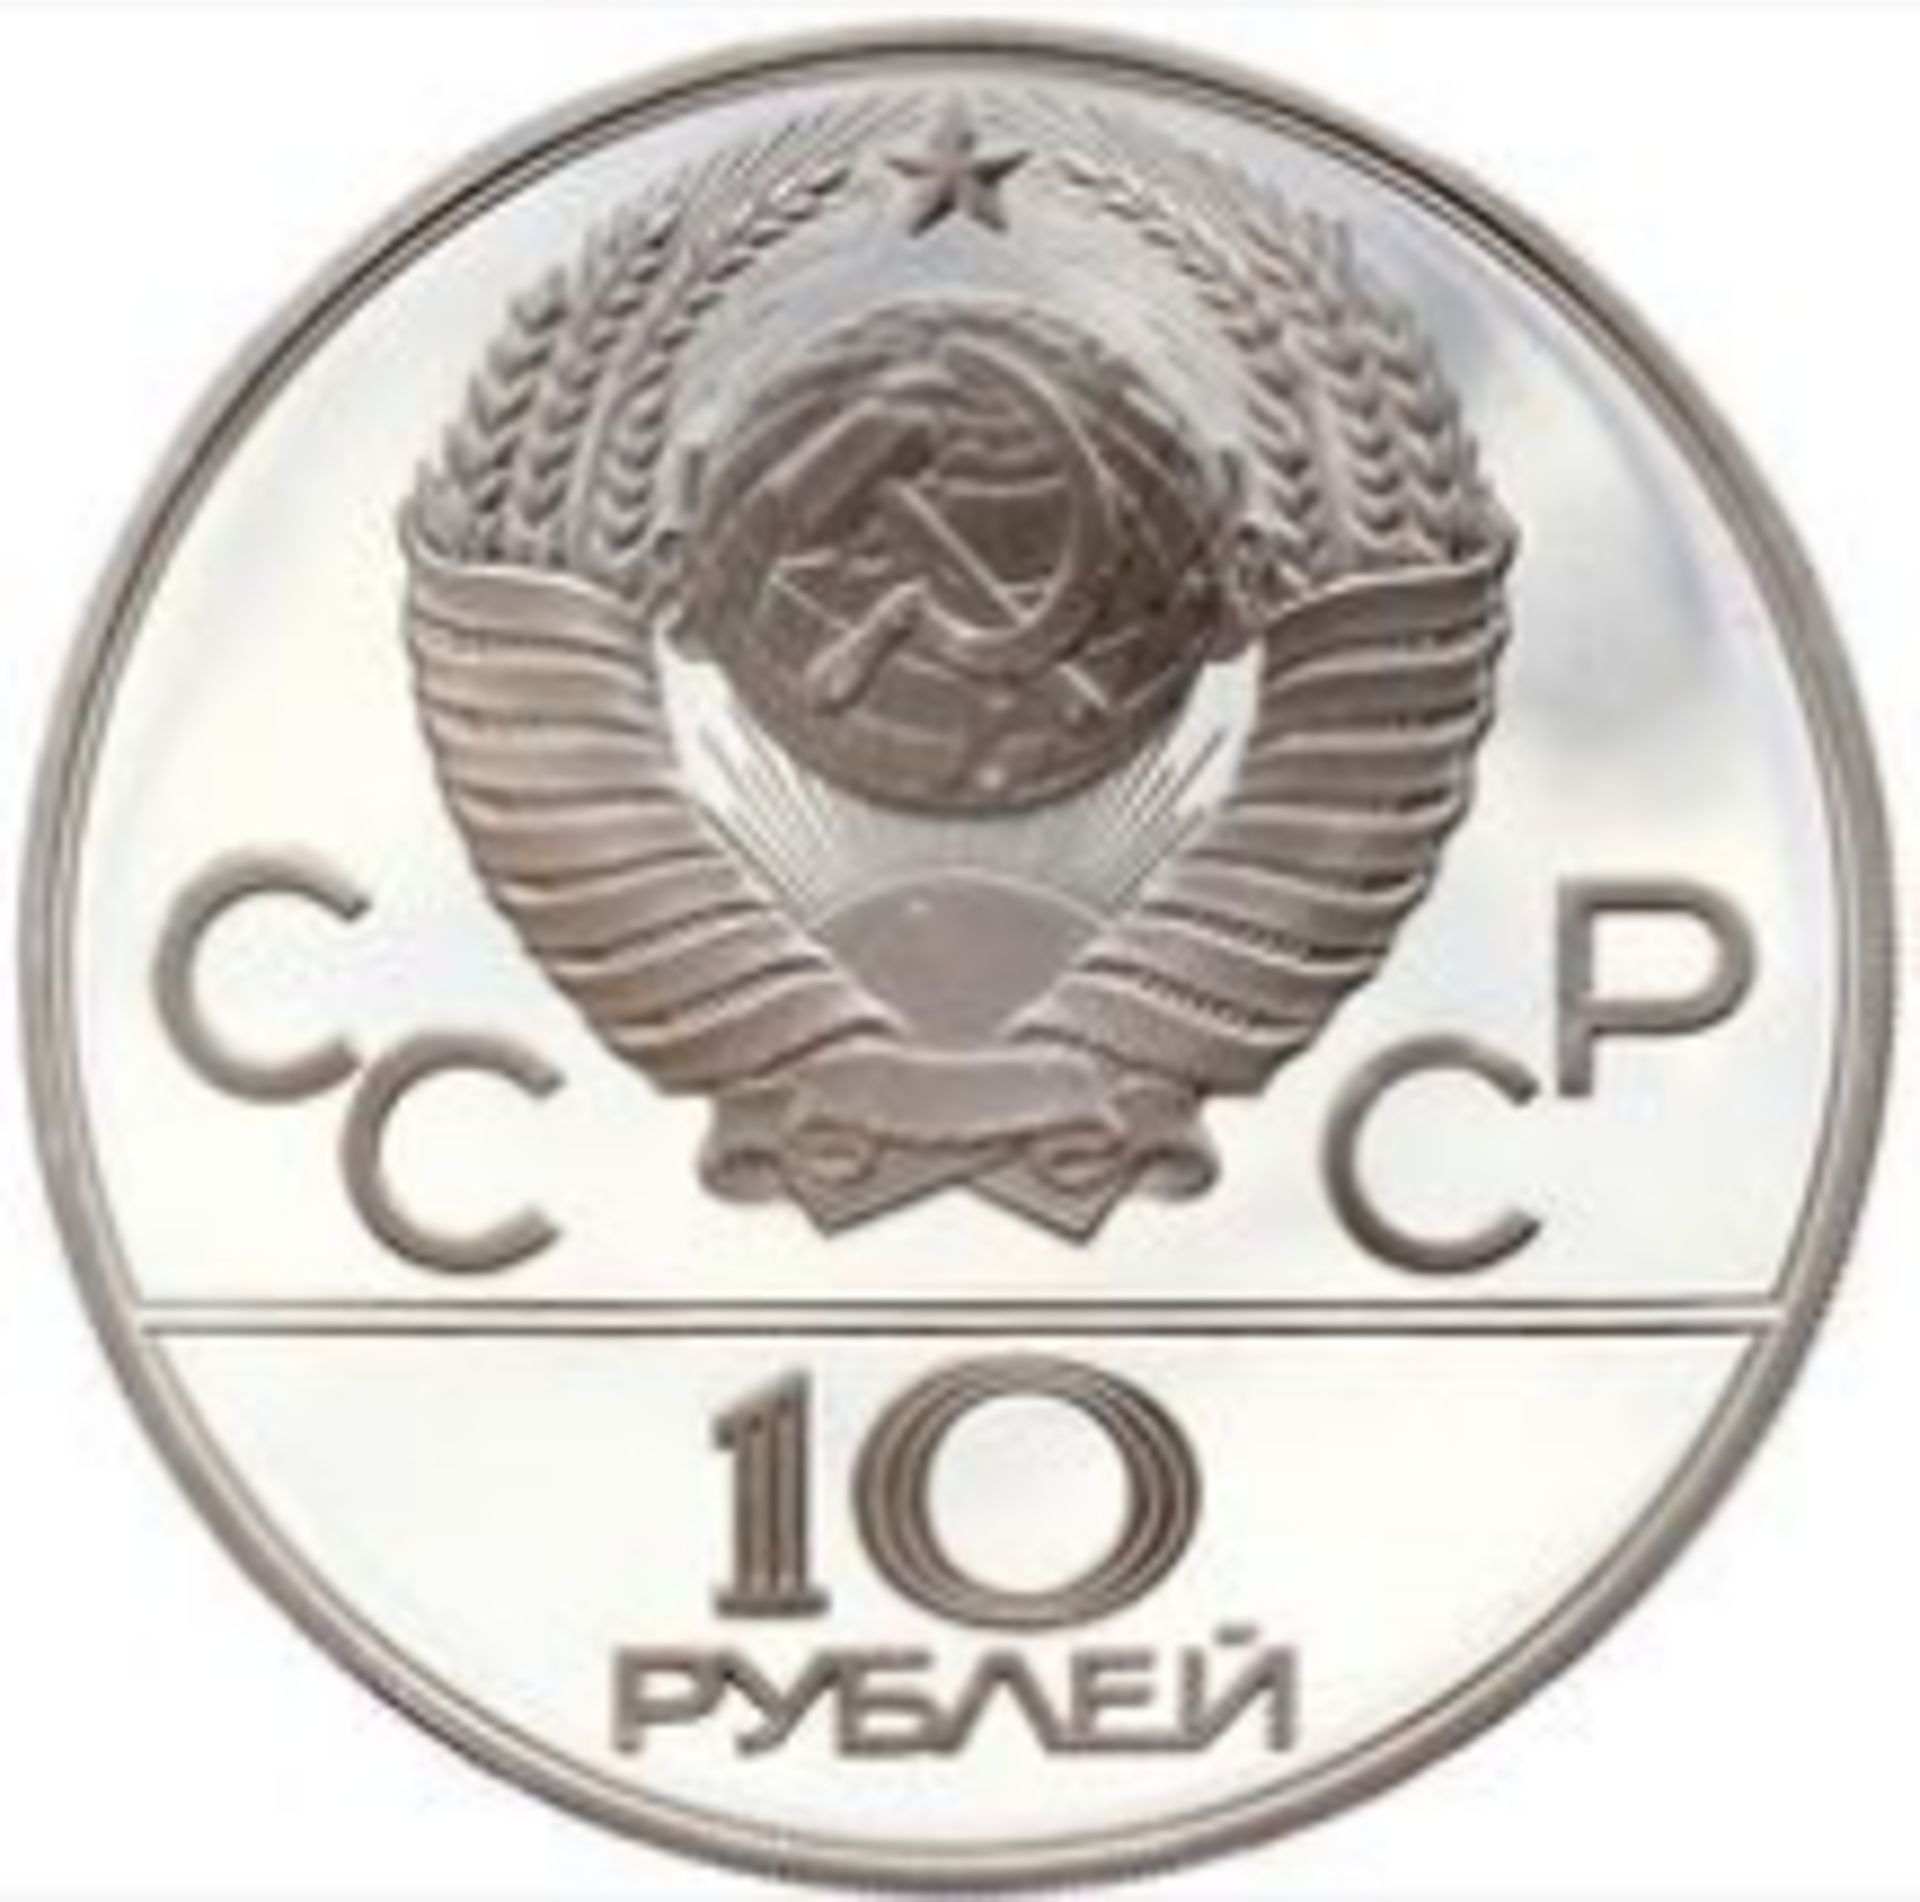 Russia - USSR 10 roubles 1980 - Silver proof 1980 olympics - moscow - wrestling - Image 2 of 4